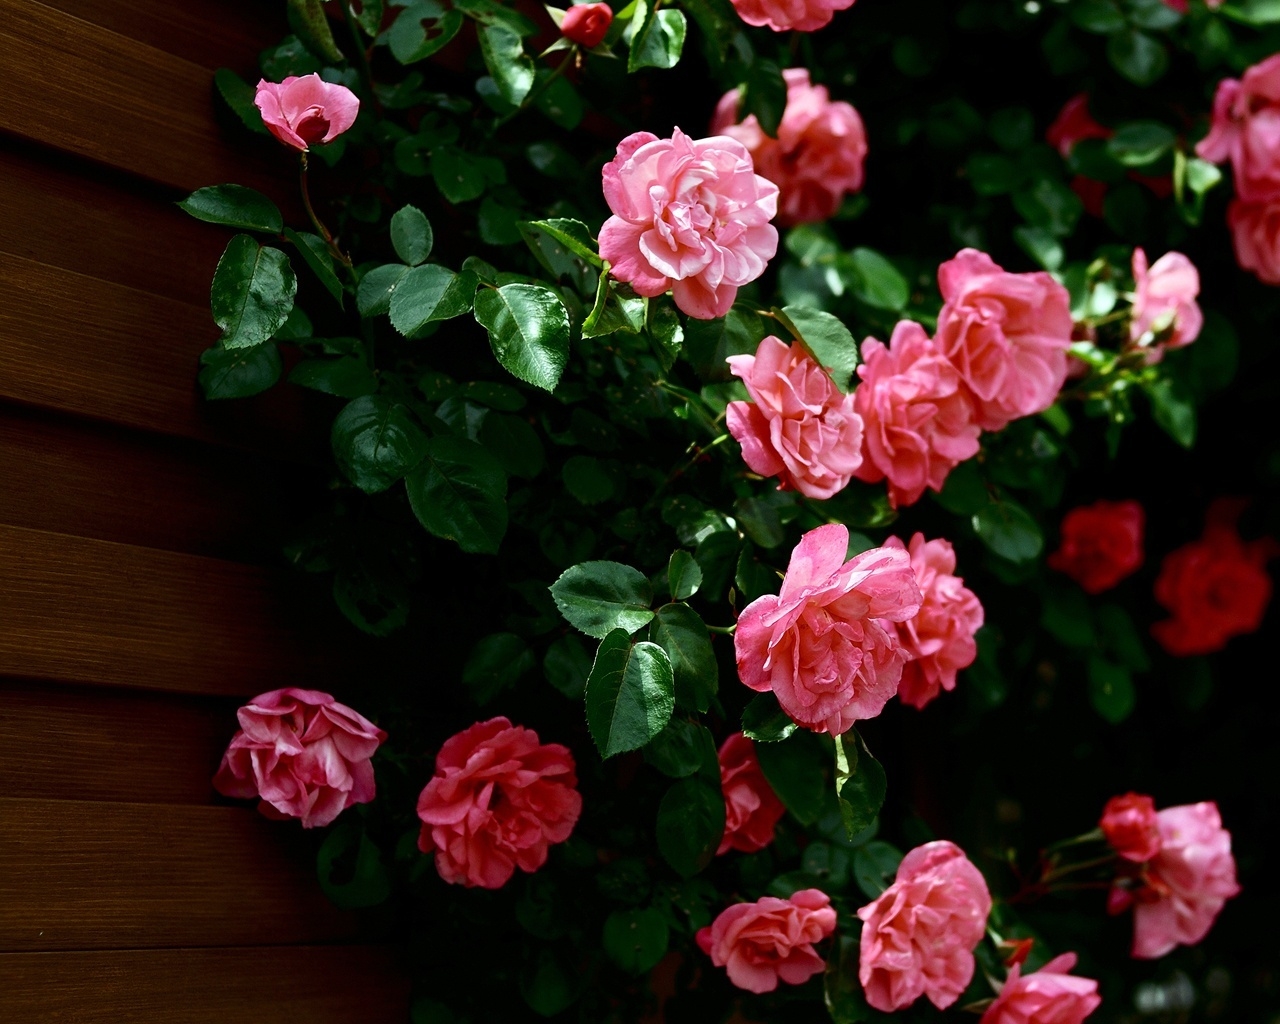 Very Nice Roses for 1280 x 1024 resolution